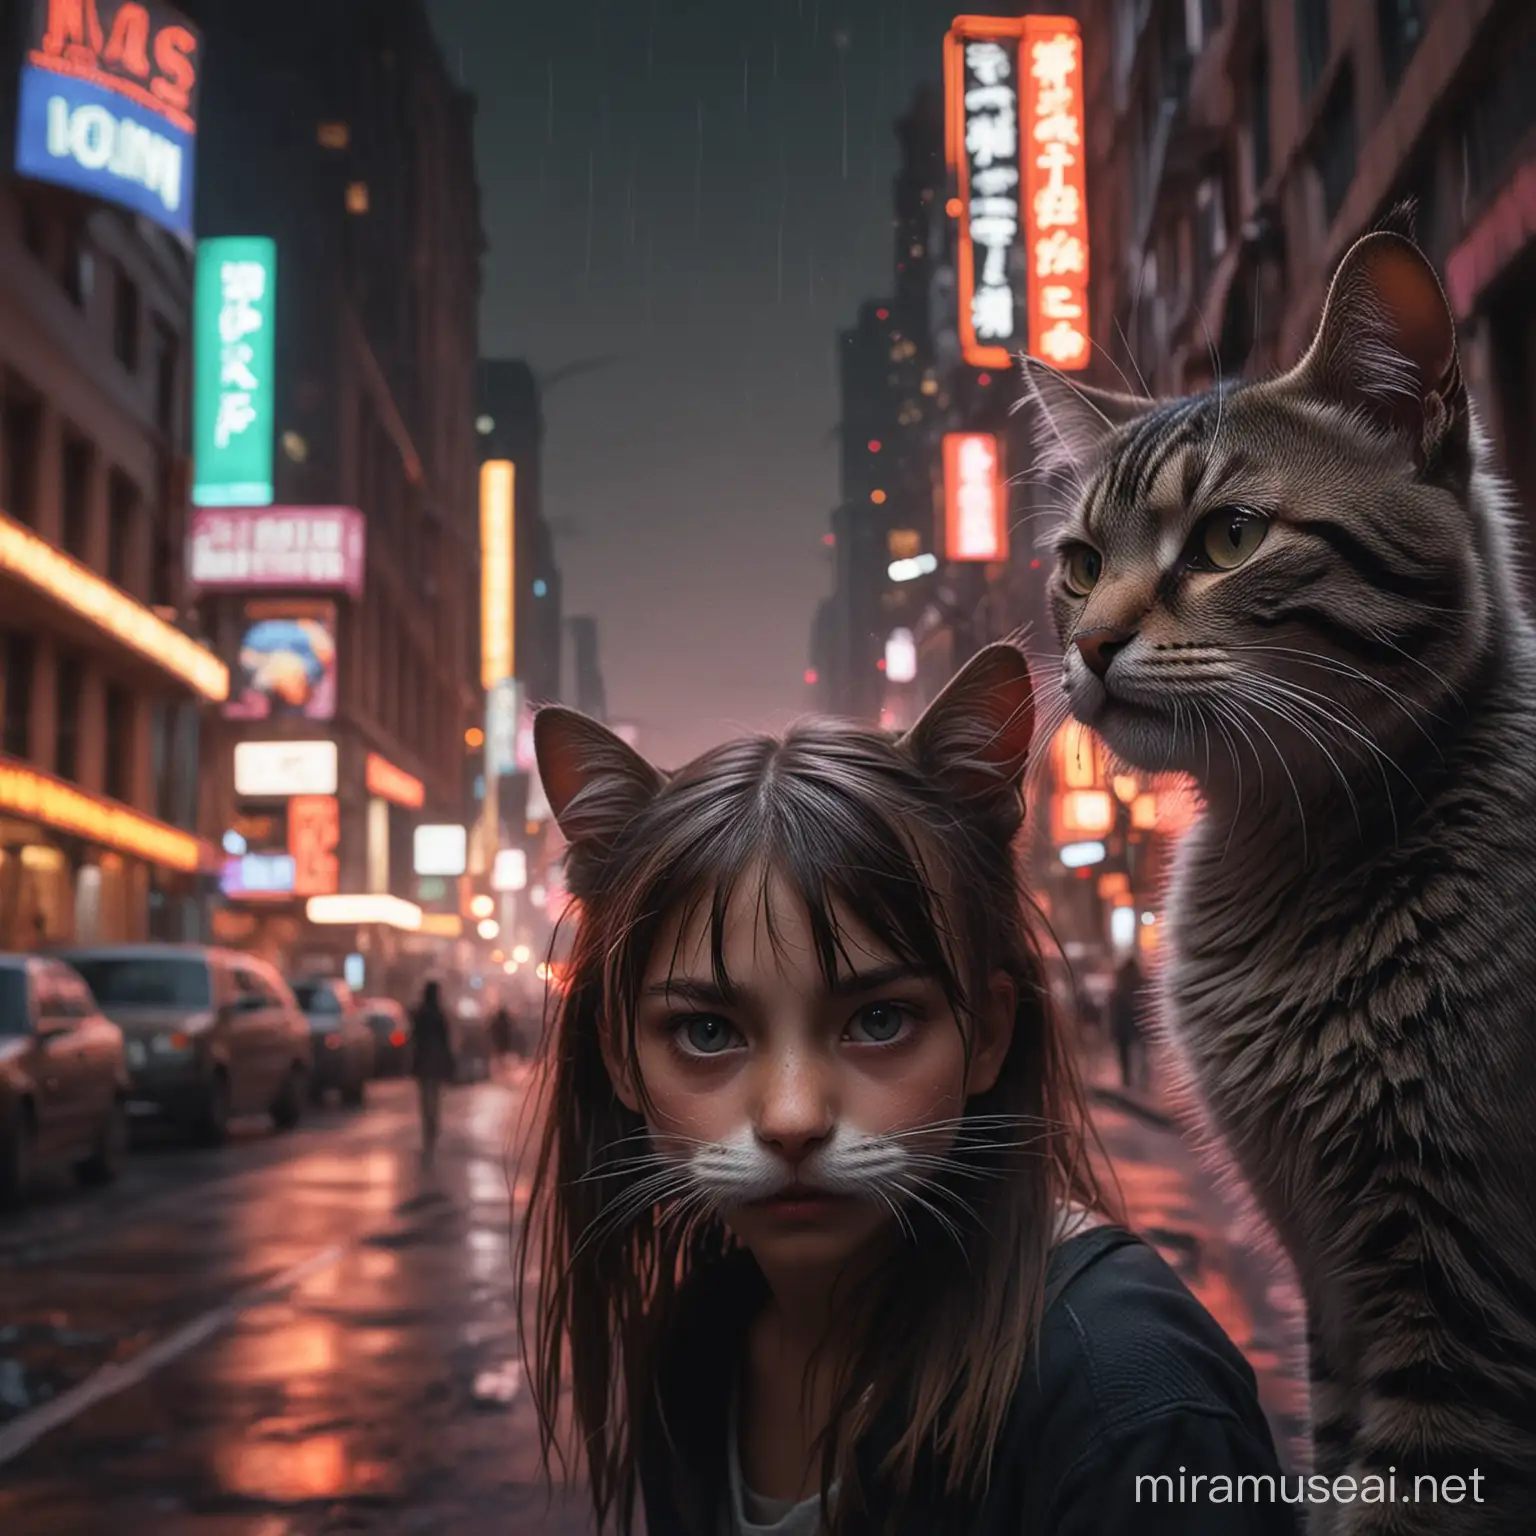 A breathtaking new masterpiece of the wild tribe     cats were captured by photographer Wlop. A girl, 10 years old, surrounded by the neon lights of the big city. A well-composed image contains great cinematic elements that create a sense of realism and live action. The ultra-realistic and highly detailed photo has a sharp emphasis on the intense expression of the girl-cat, reminiscent of a scene from a dystopian film., photo, film, photo, cinematography a sharp emphasis on the intense expression of a girl-cat, reminiscent of a scene from a dystopian film., photo, film, photo , cinematography